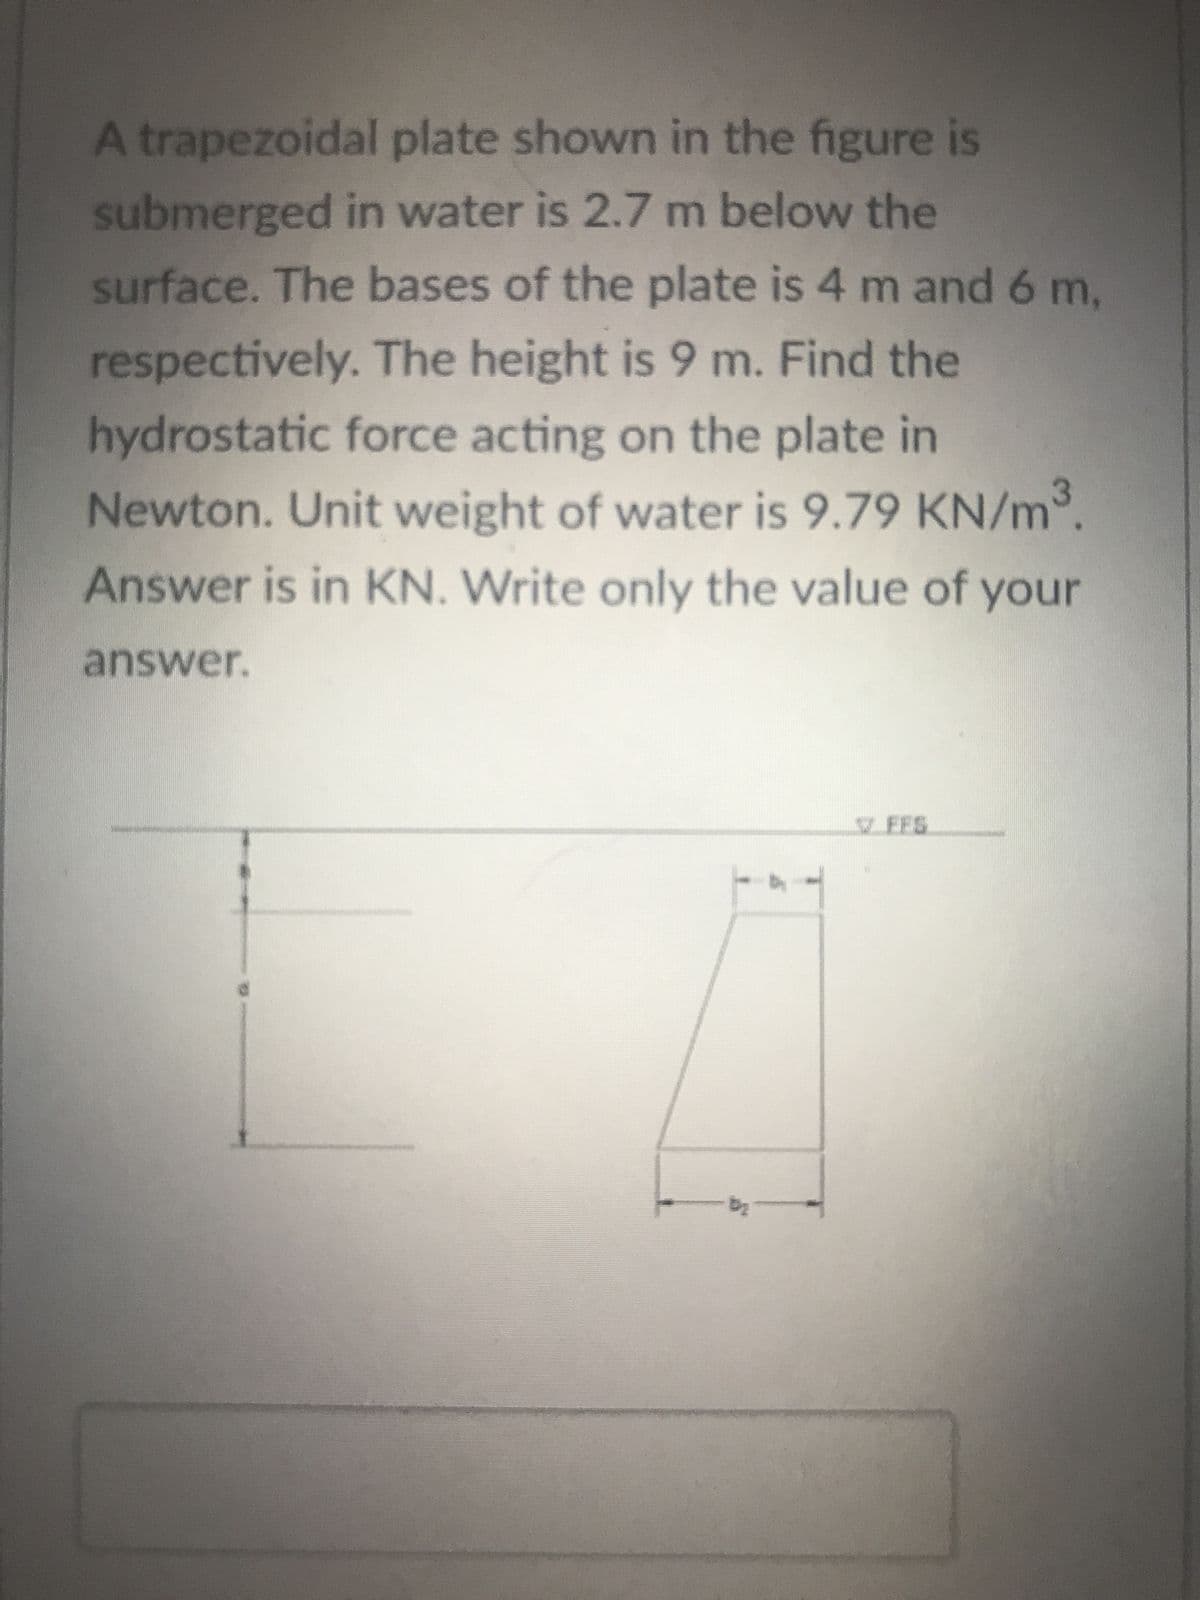 A trapezoidal plate shown in the figure is
submerged in water is 2.7 m below the
surface. The bases of the plate is 4 m and 6 m,
respectively. The height is 9 m. Find the
hydrostatic force acting on the plate in
Newton. Unit weight of water is 9.79 KN/m³.
Answer is in KN. Write only the value of your
answer.
-b₂